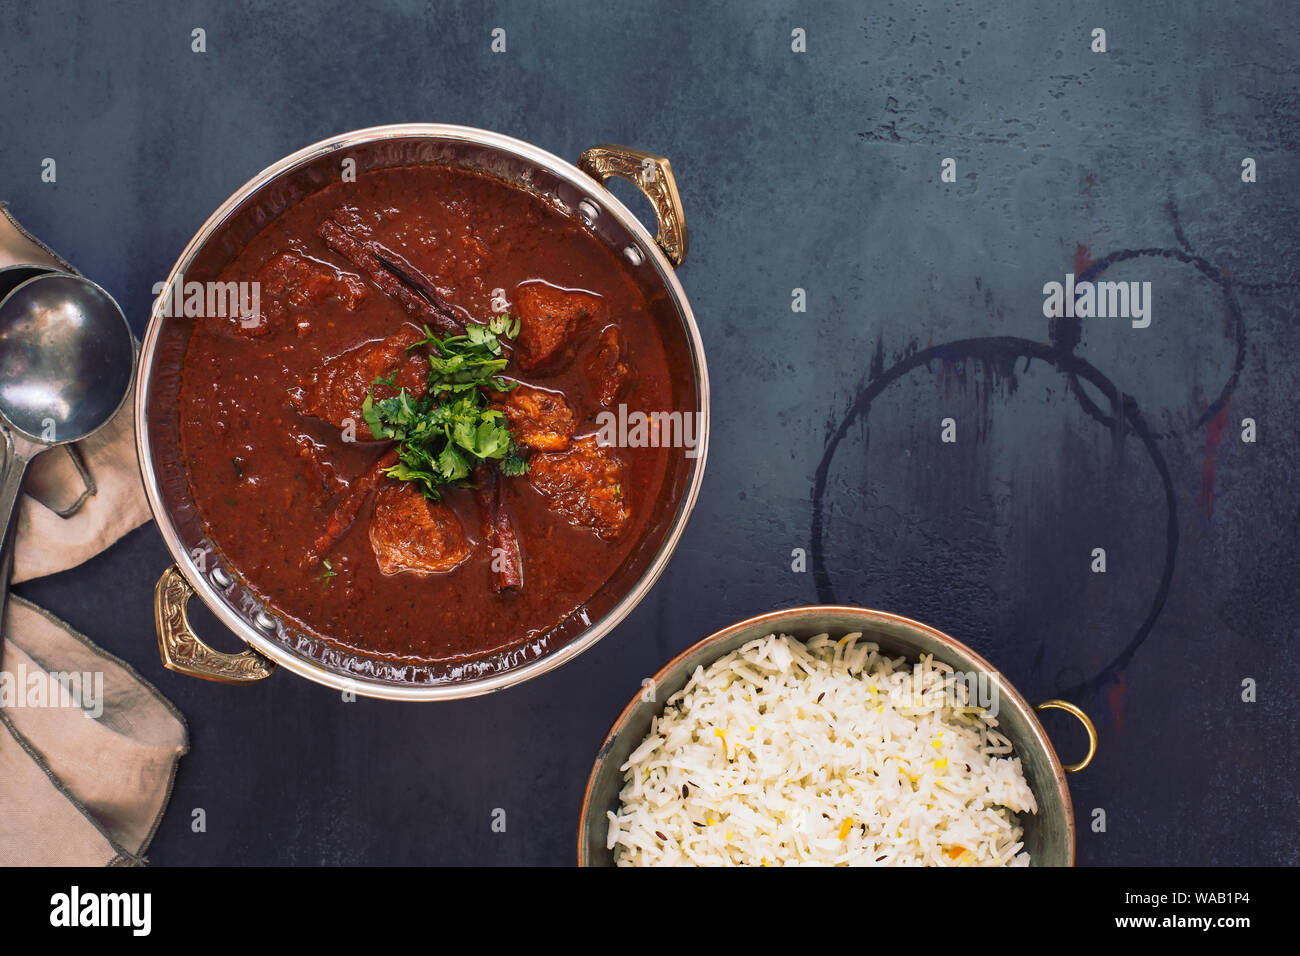 Kashmiri Lamb Rogan Josh. Slow cooked lamb curry served with pulao rice and garnished with coriander. Top view, blank space Stock Photo